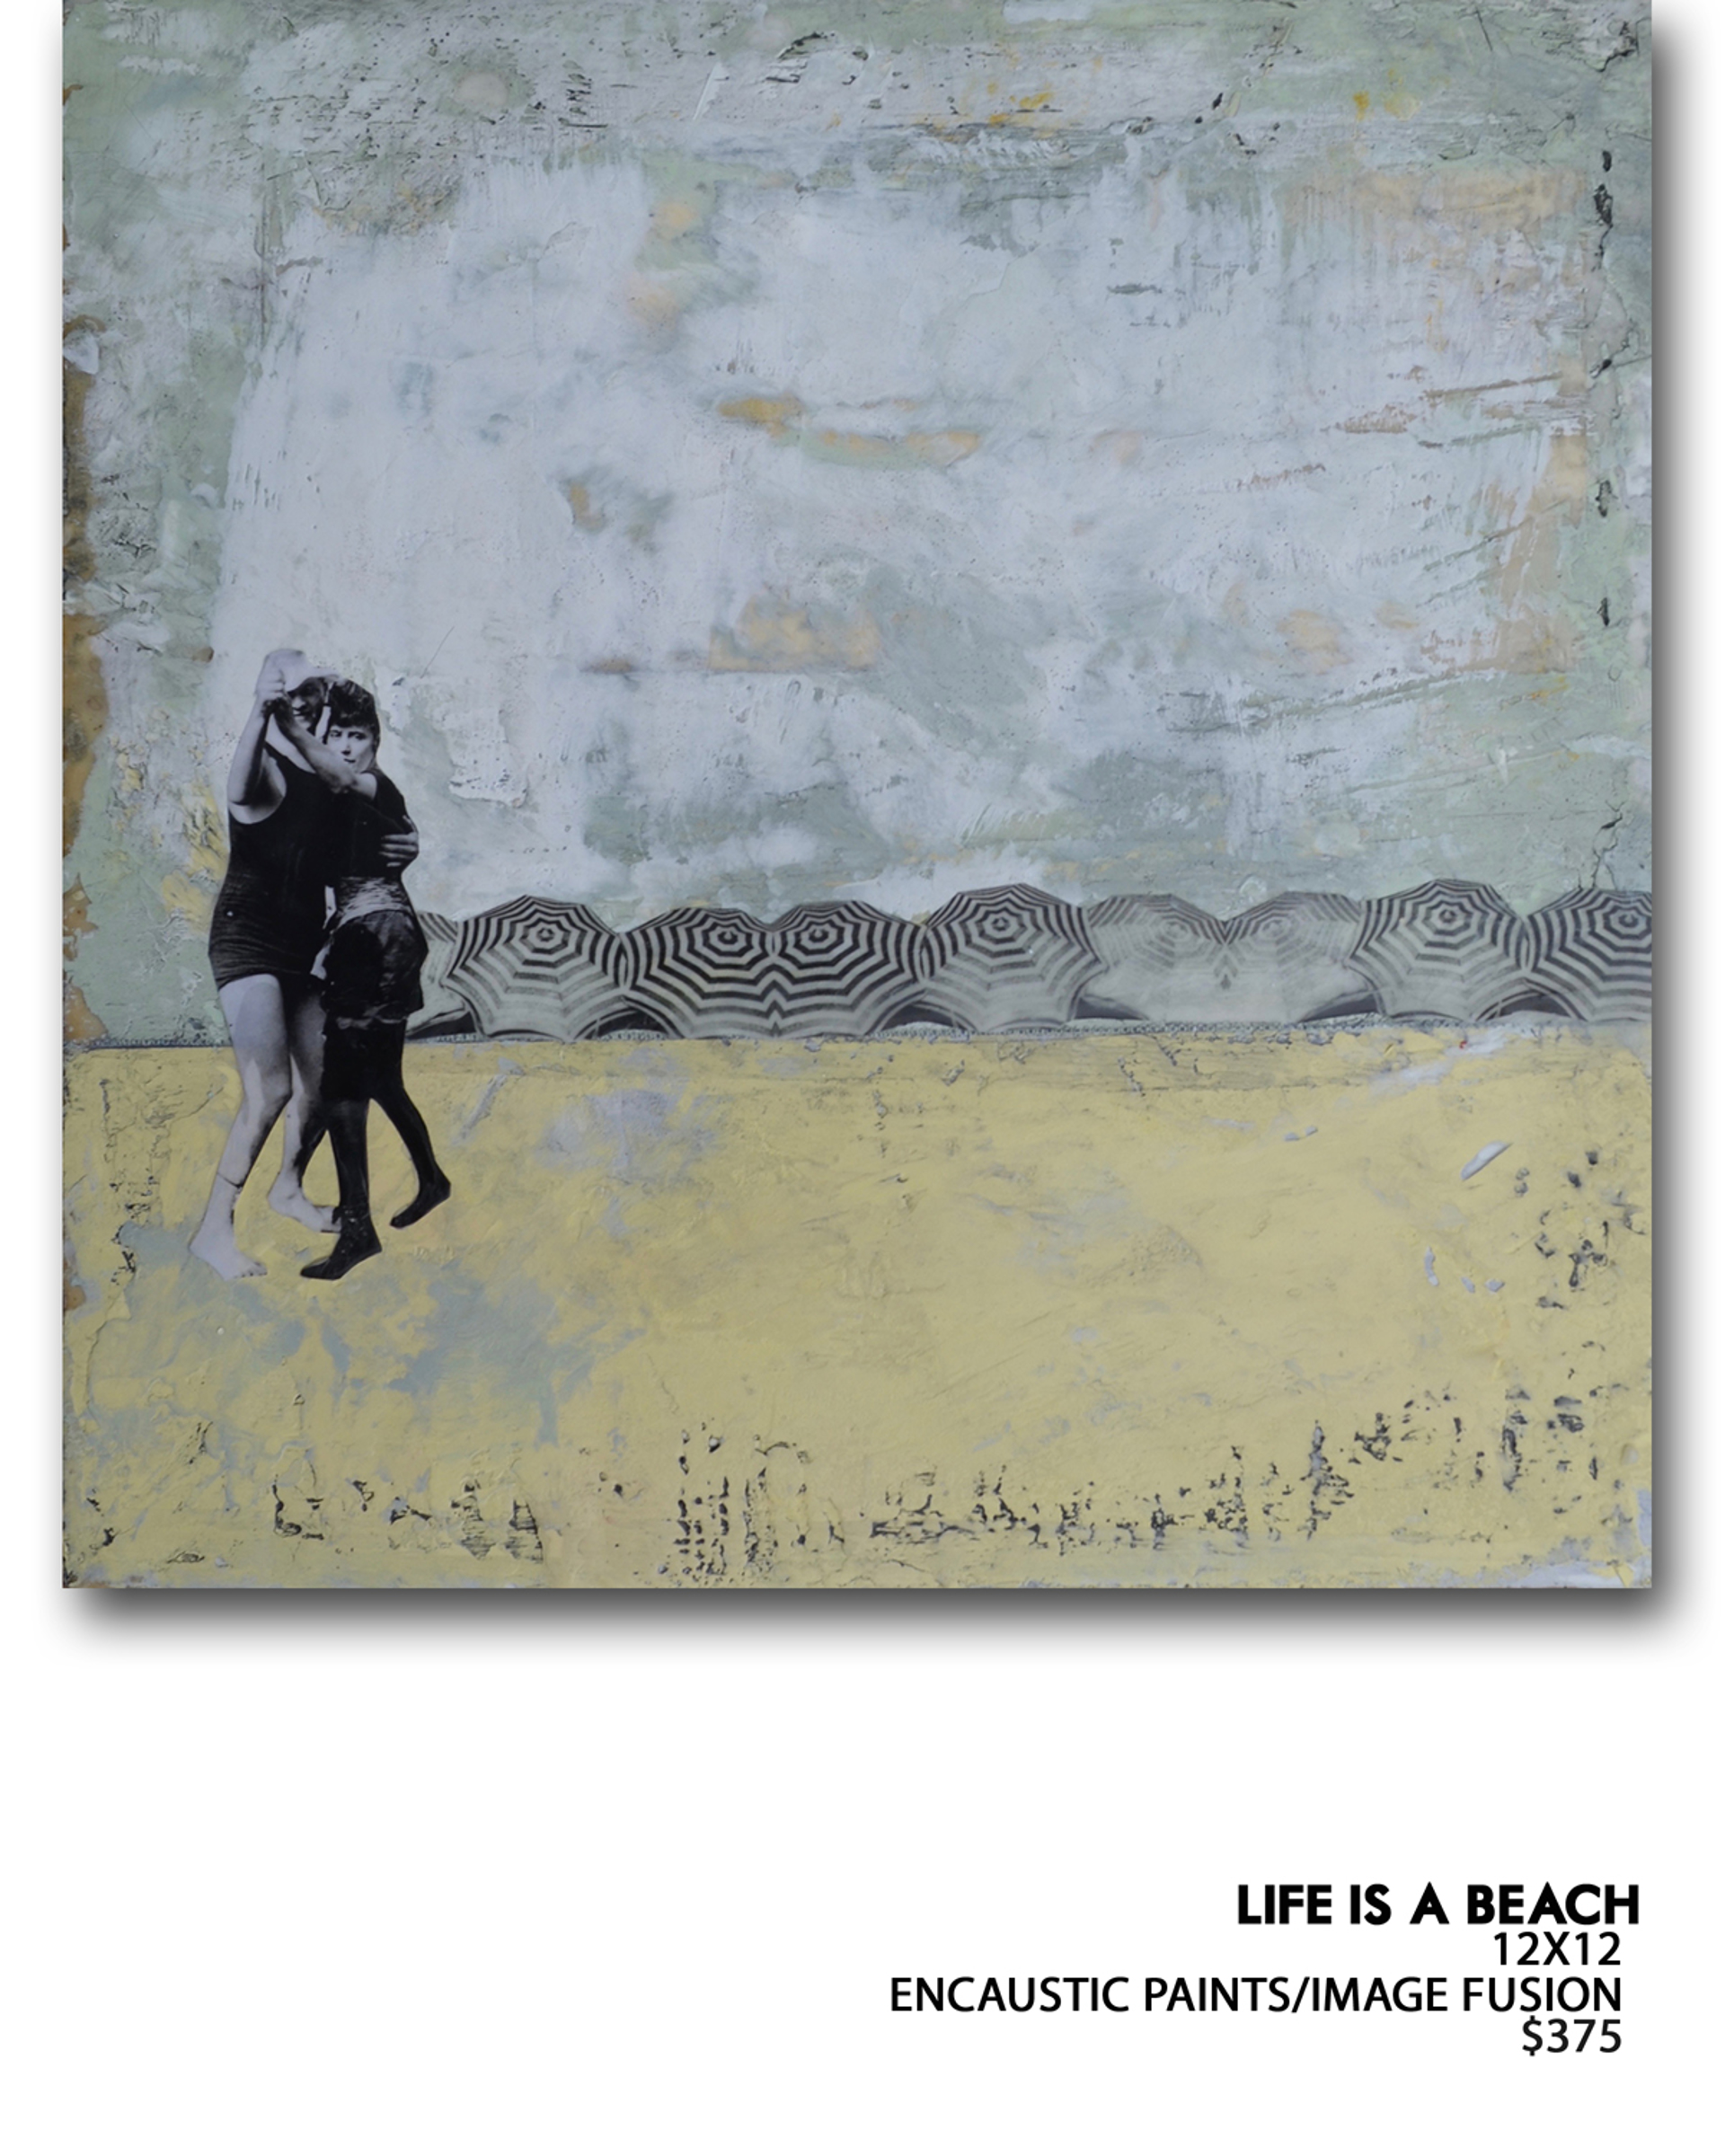 Life's a Beach by Ruth Crowe